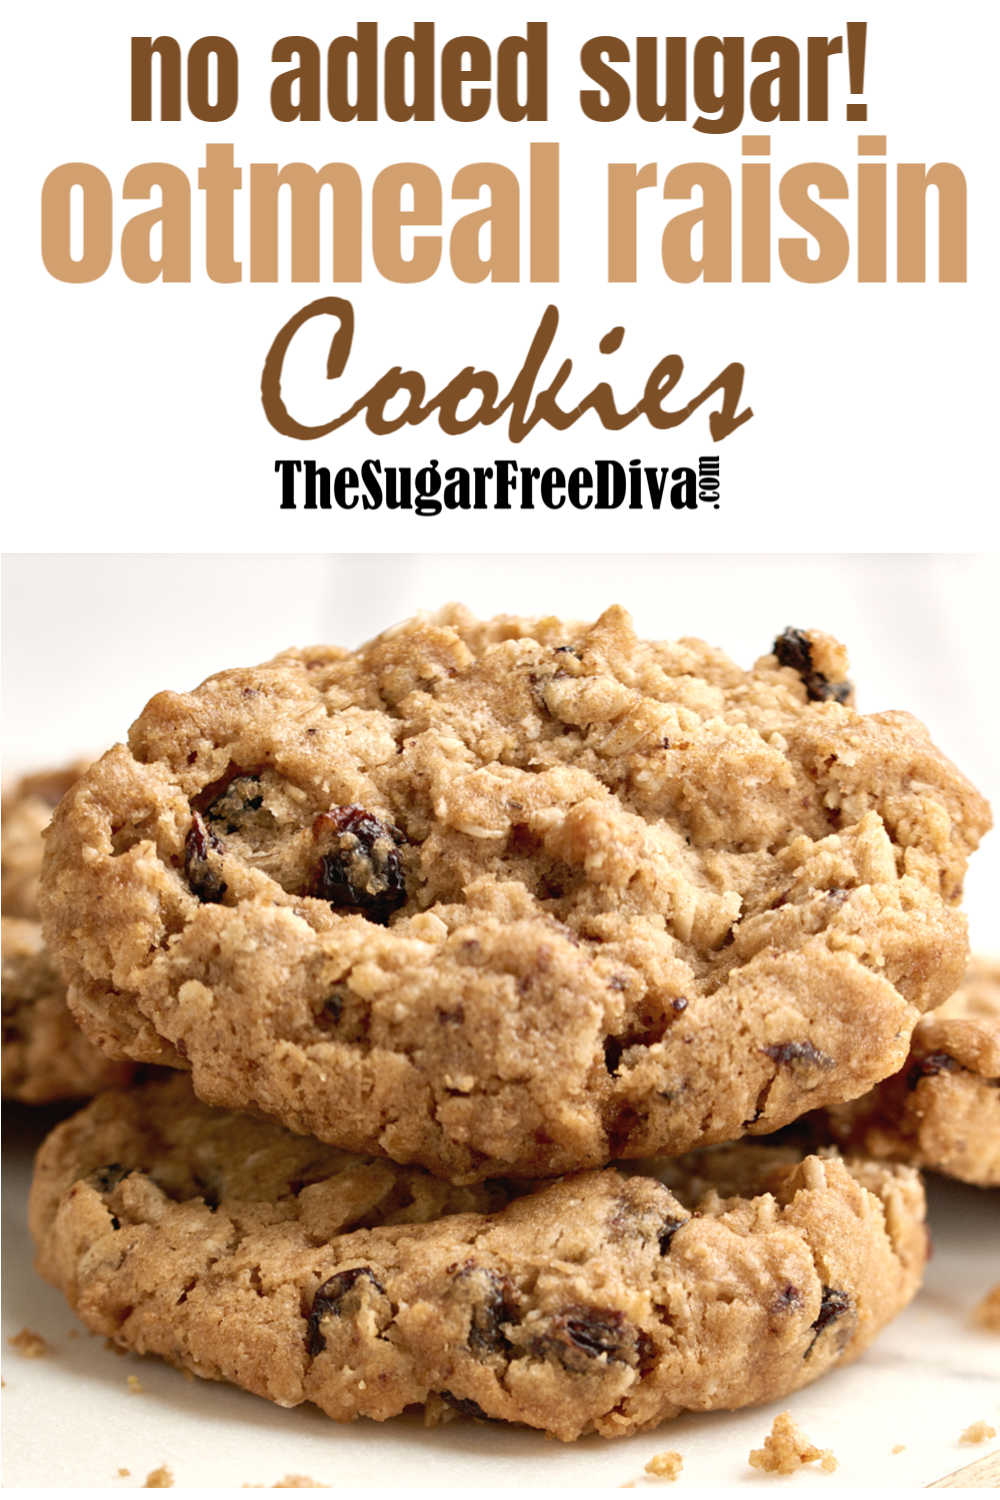 Oatmeal Cookie Recipe For Diabetic - Recipe courtesy of ...